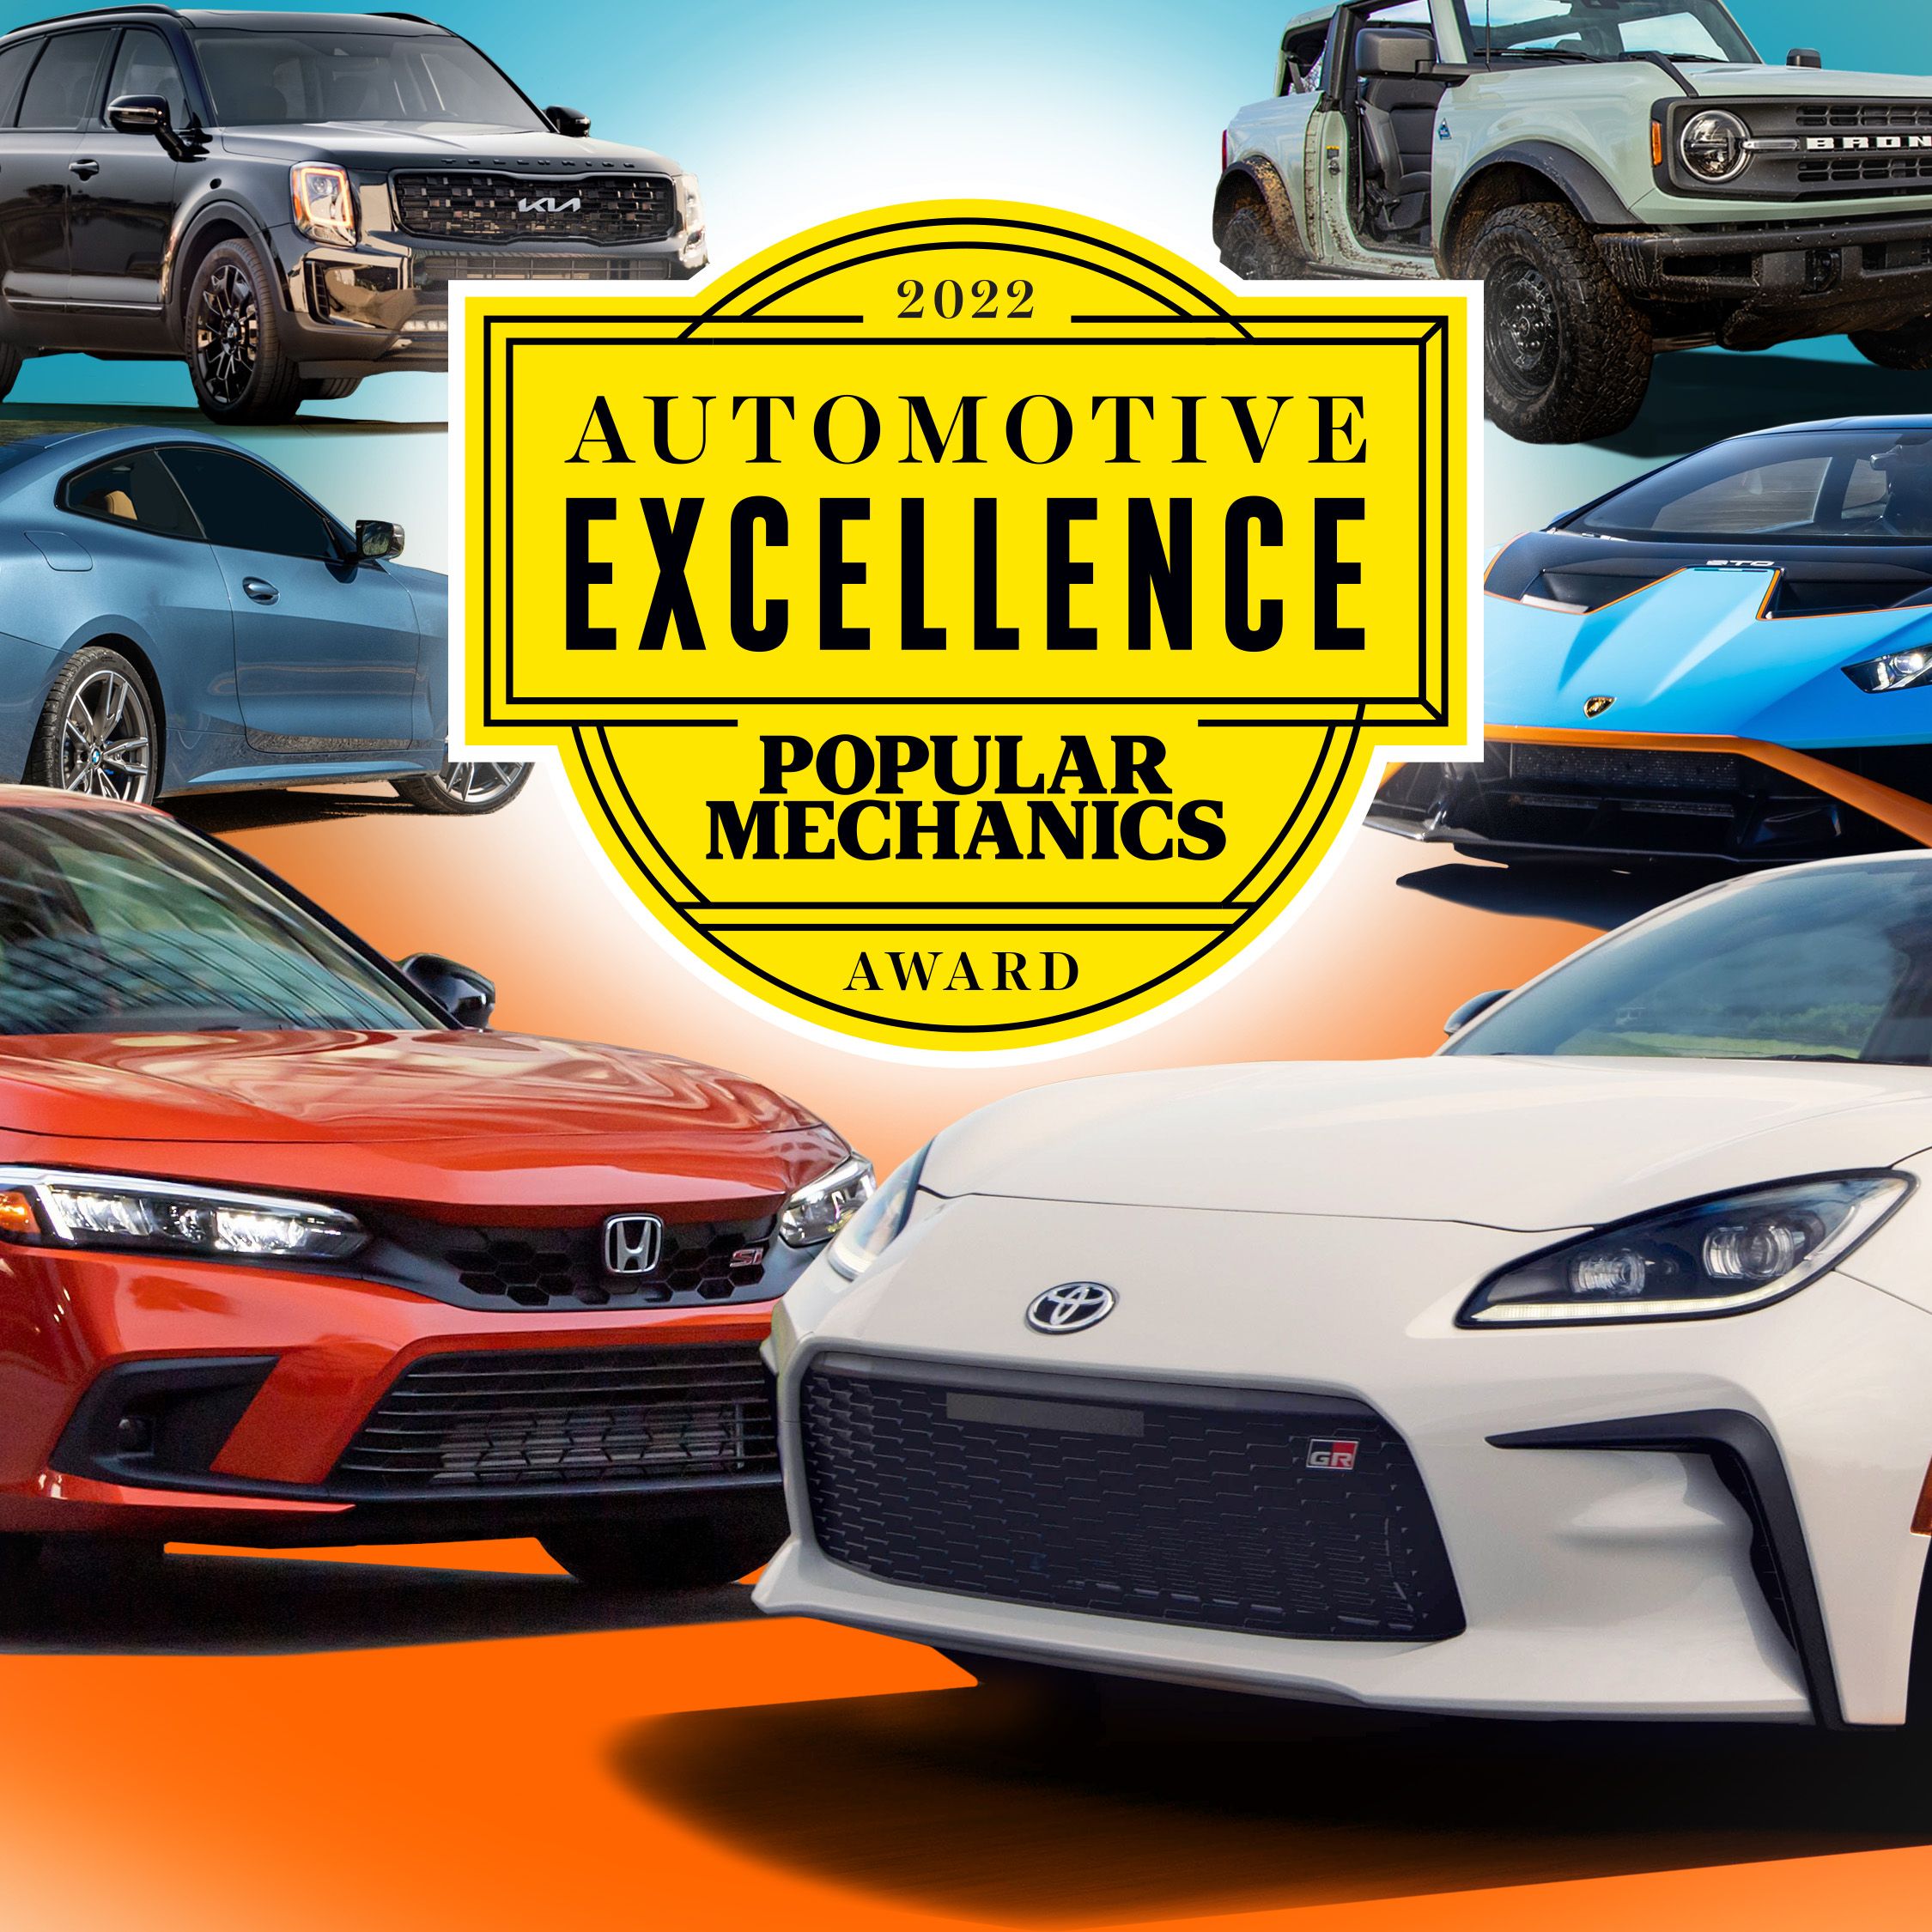 The Best Cars, Trucks, Electric Vehicles, and Automotive Accessories of 2022